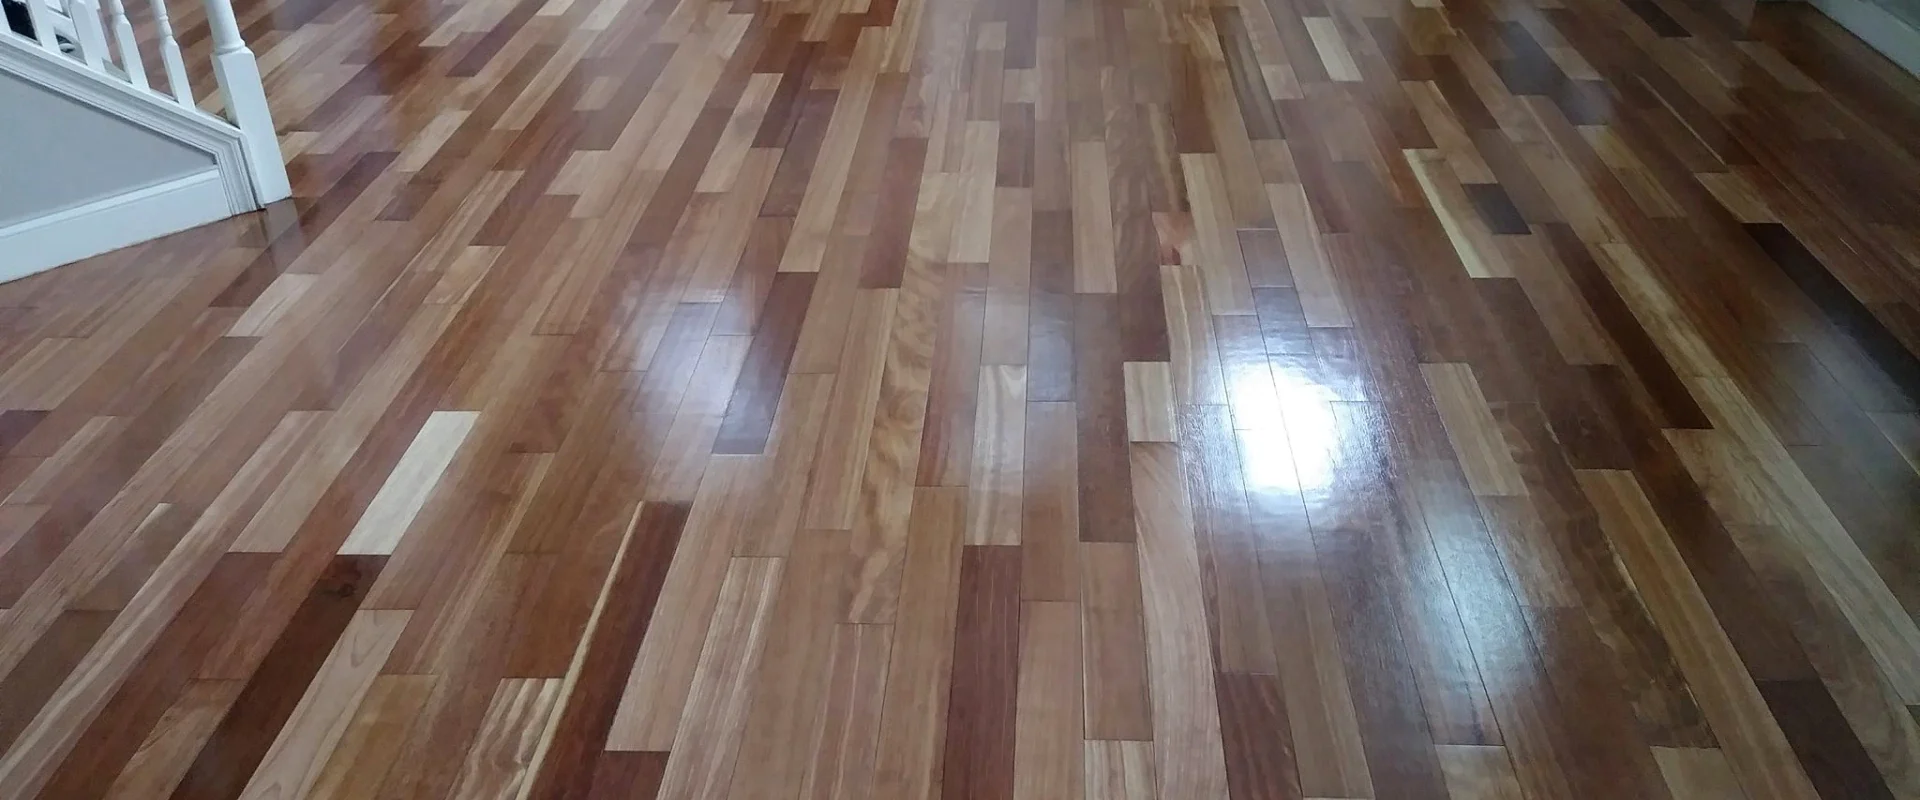 flooring installation for residential client 2